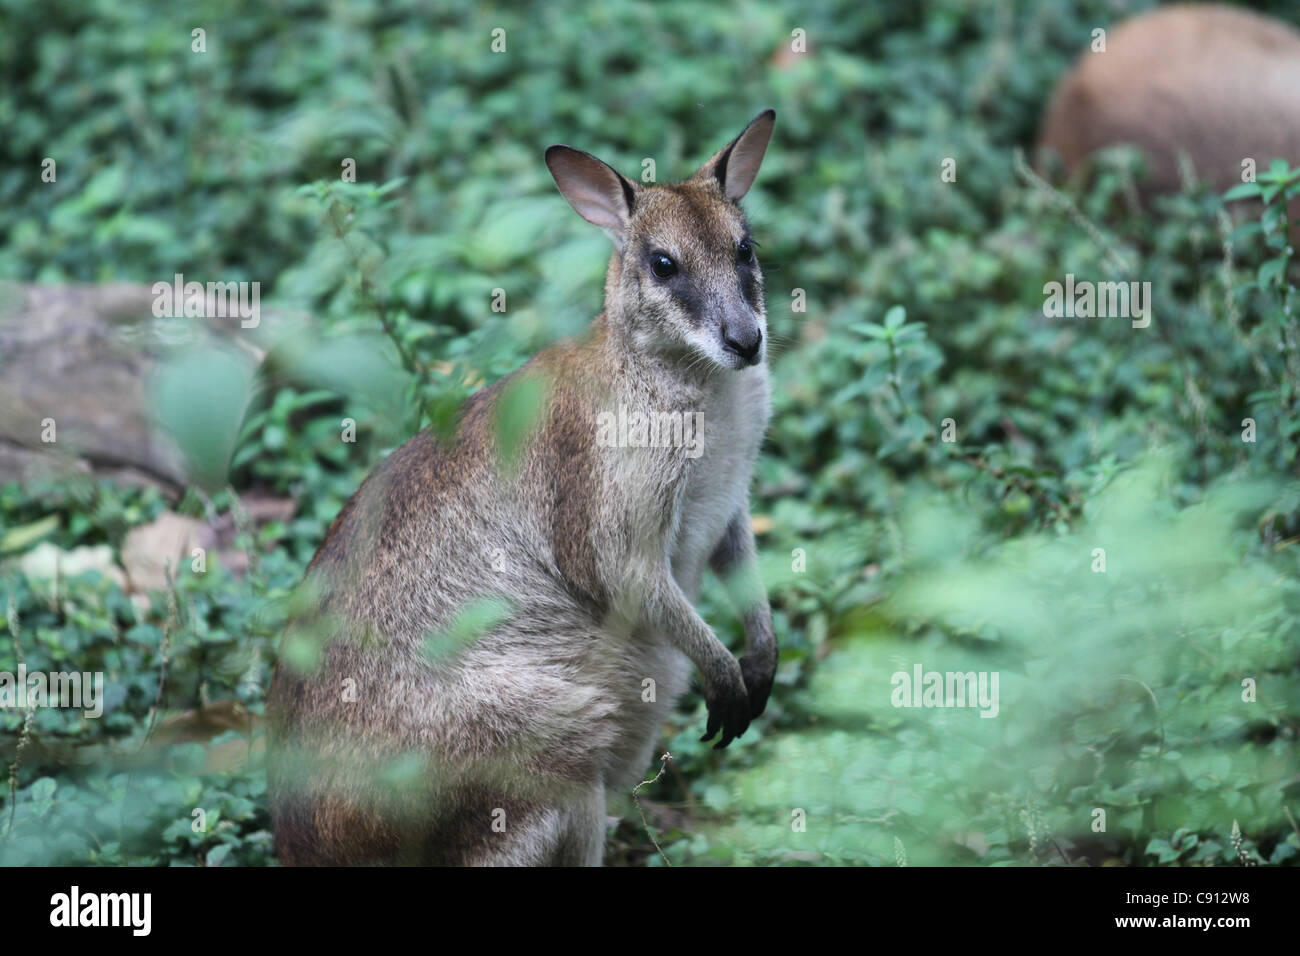 Wallaby standing in green foliage Stock Photo